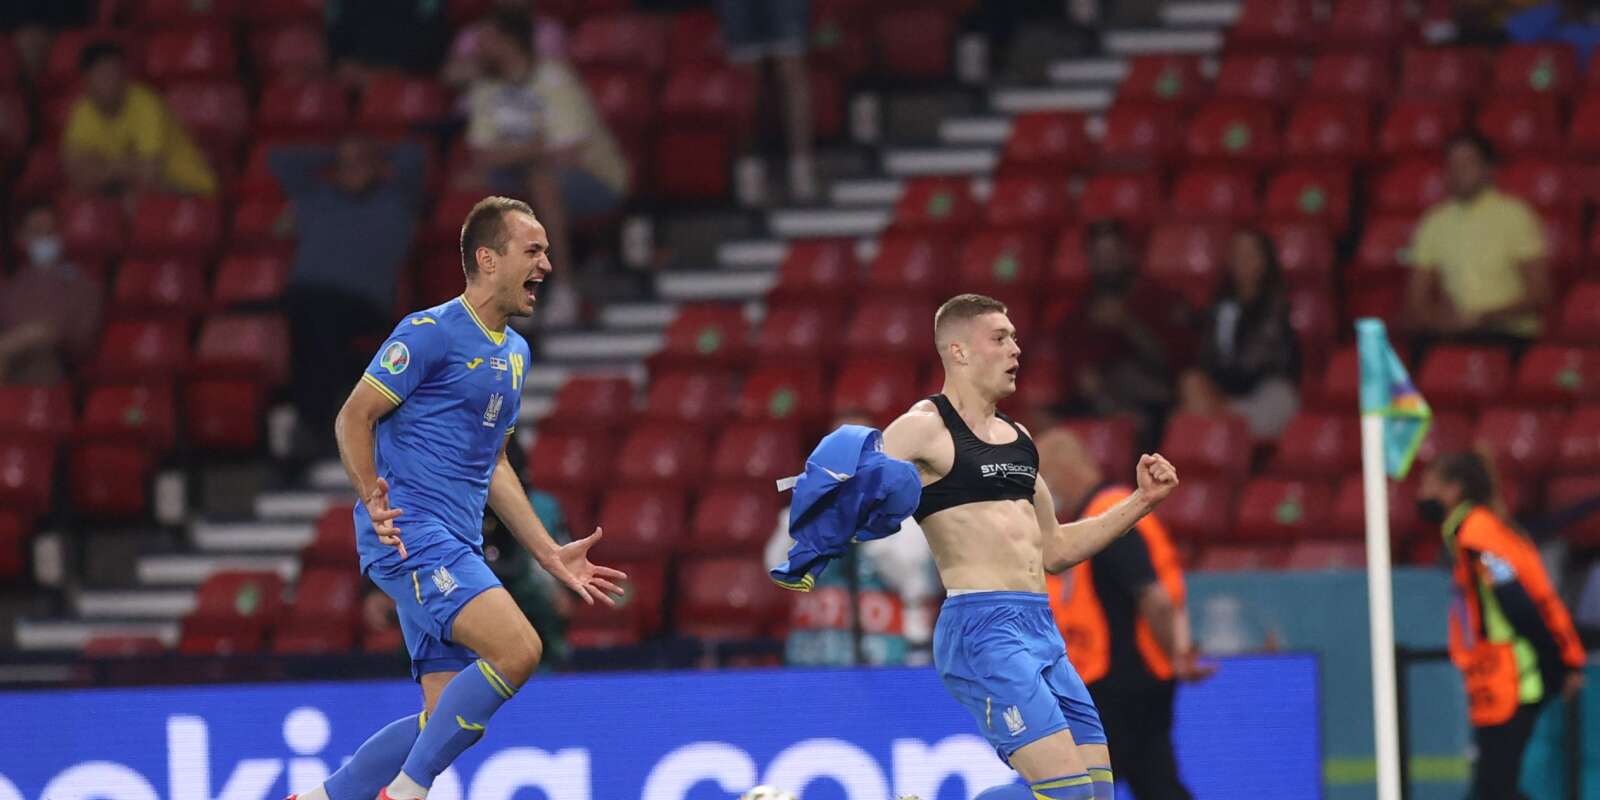 Ukraine's forward Artem Dovbyk (R) celebrates scoring their second goal during the UEFA EURO 2020 round of 16 football match between Sweden and Ukraine at Hampden Park in Glasgow on June 29, 2021. / AFP / POOL / LEE SMITH